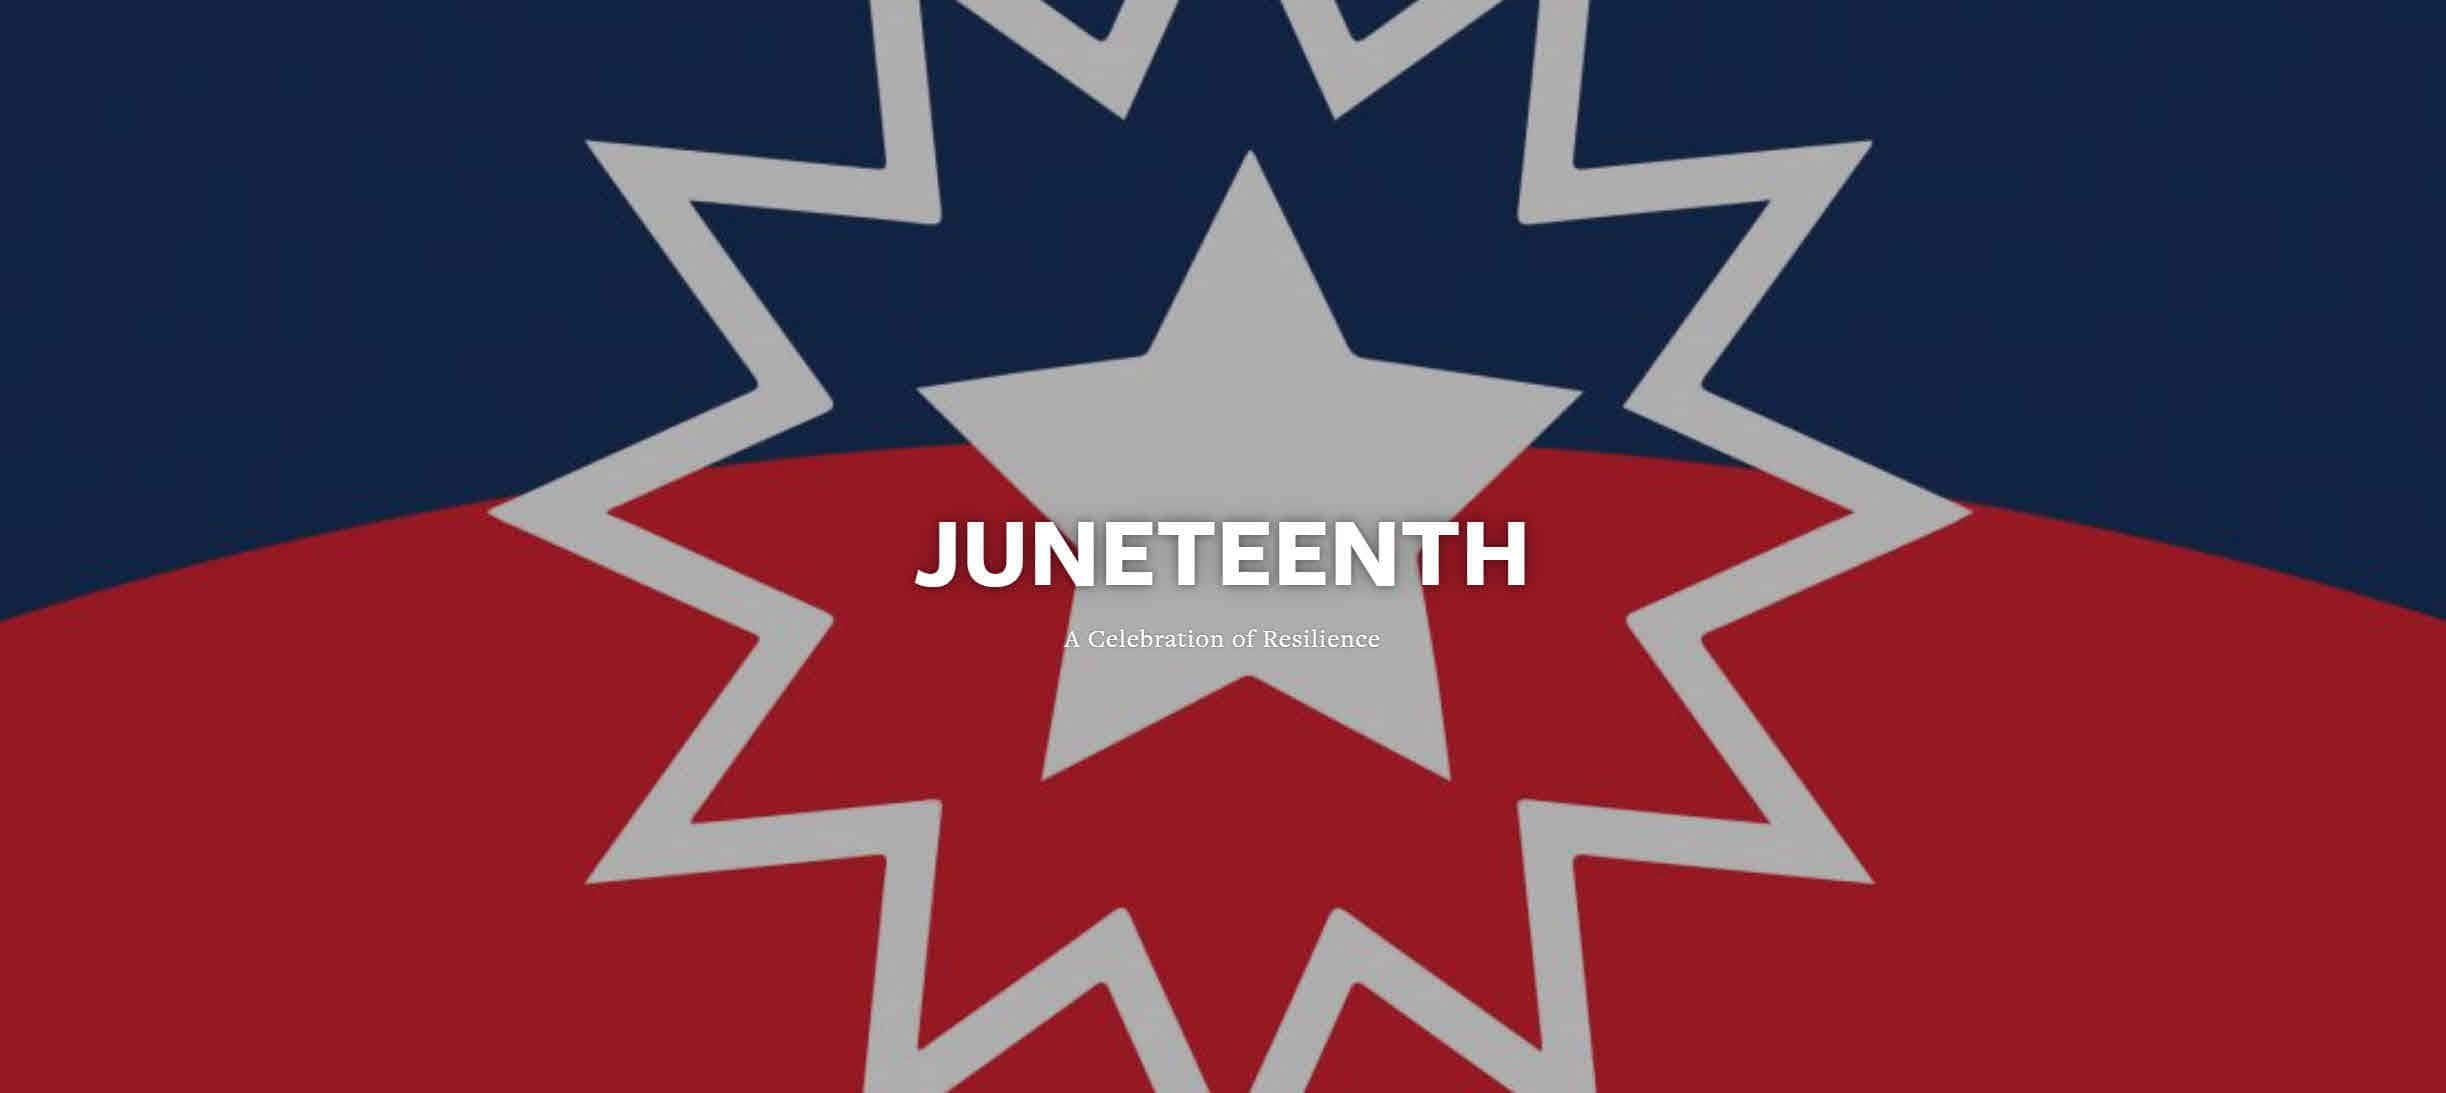 Juneteenth: A Celebration of Resilience